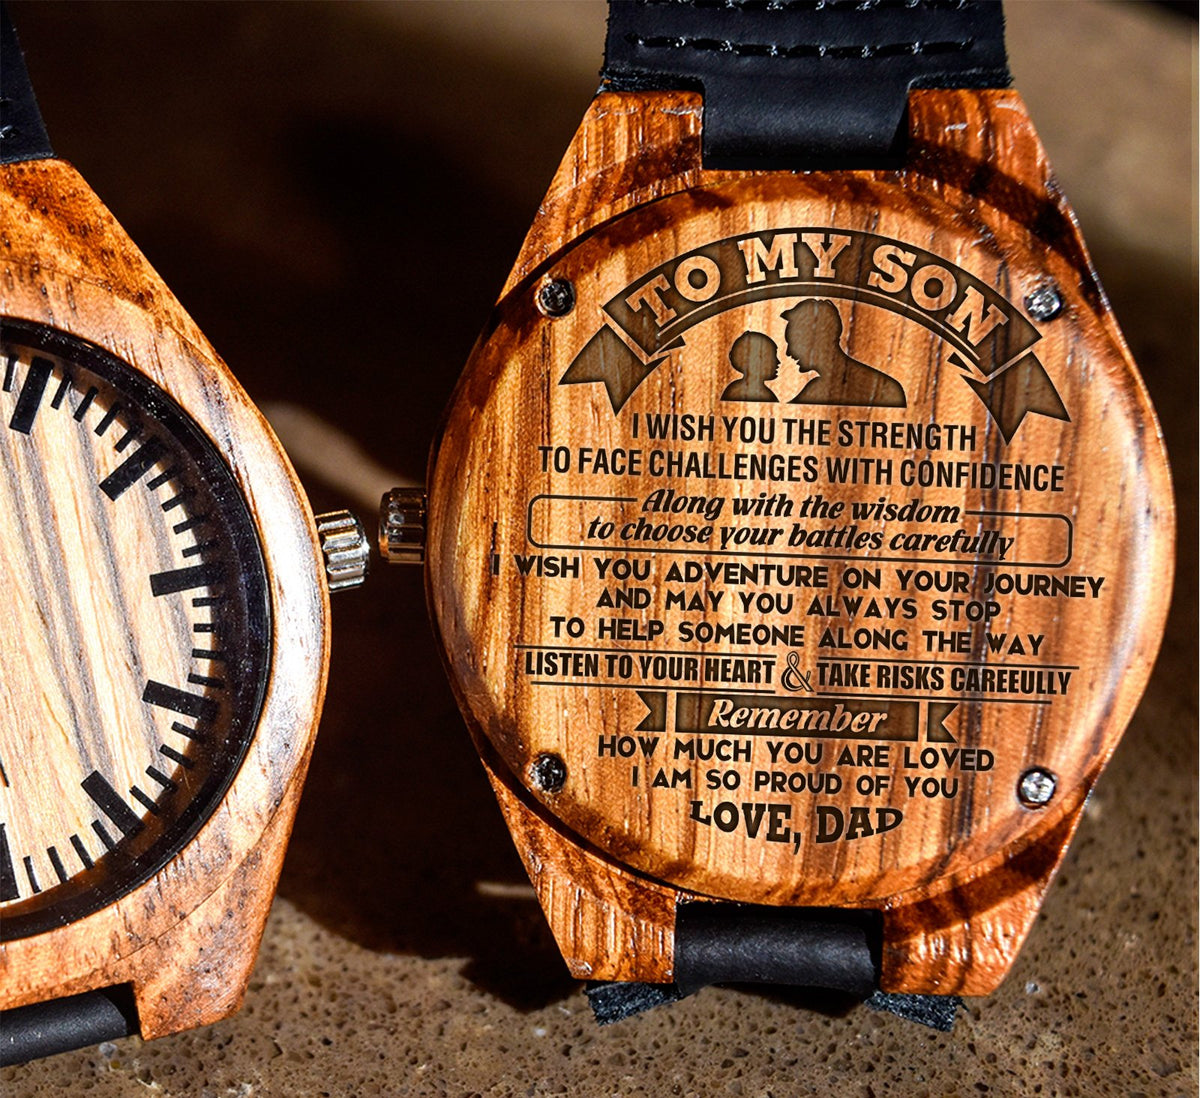 To My Son - I Wish You The Strength to Face Challenges with Confidence - Wooden Watch